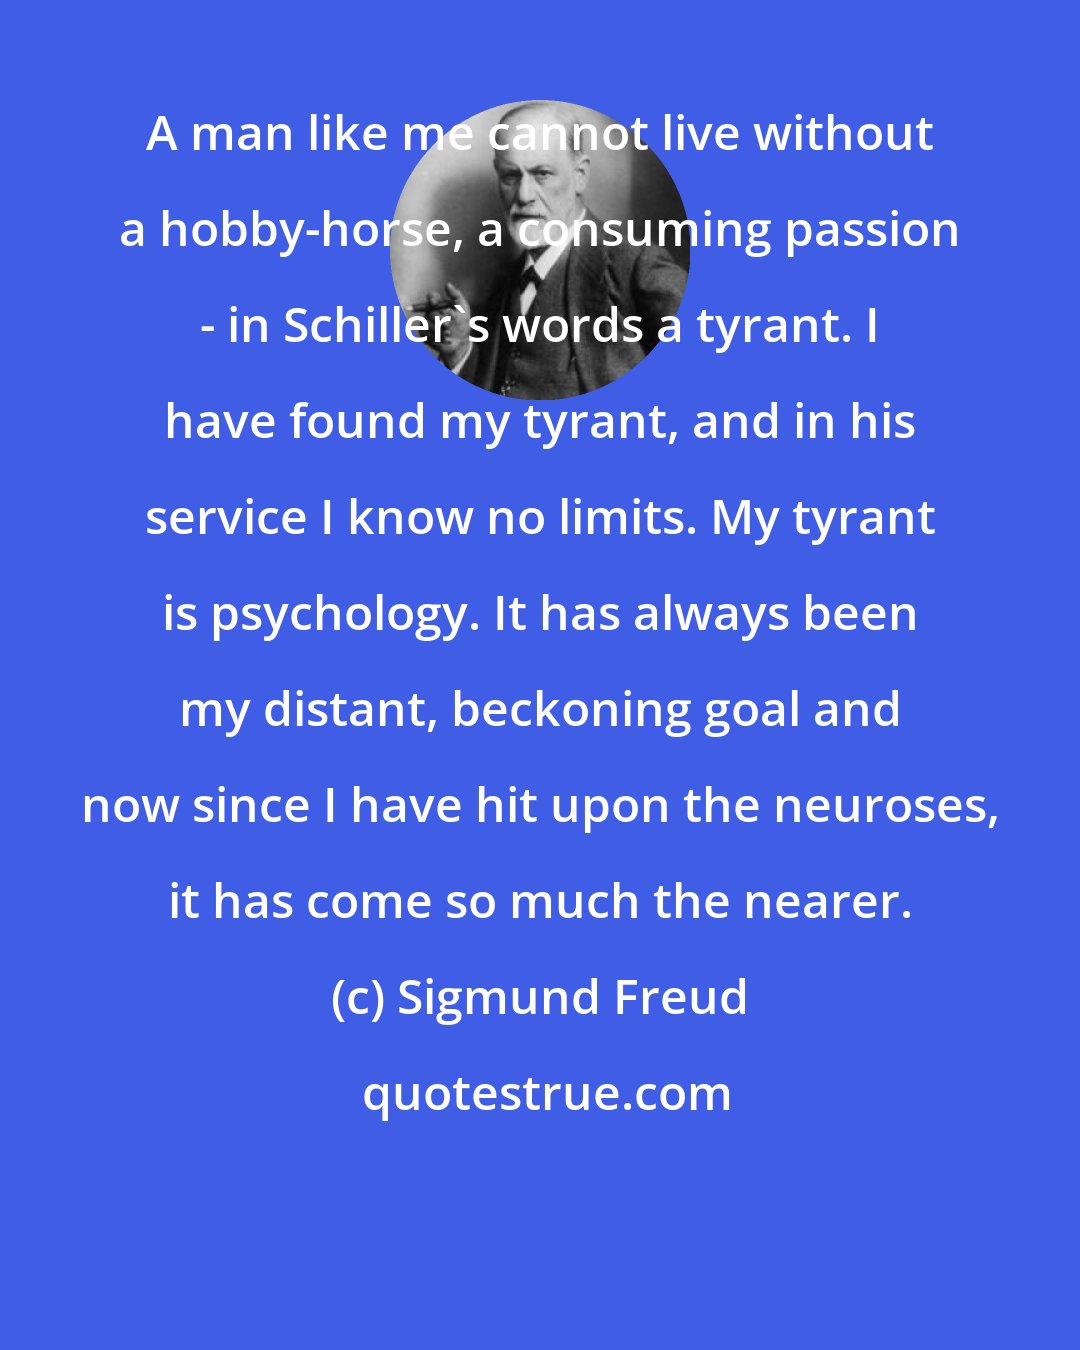 Sigmund Freud: A man like me cannot live without a hobby-horse, a consuming passion - in Schiller's words a tyrant. I have found my tyrant, and in his service I know no limits. My tyrant is psychology. It has always been my distant, beckoning goal and now since I have hit upon the neuroses, it has come so much the nearer.